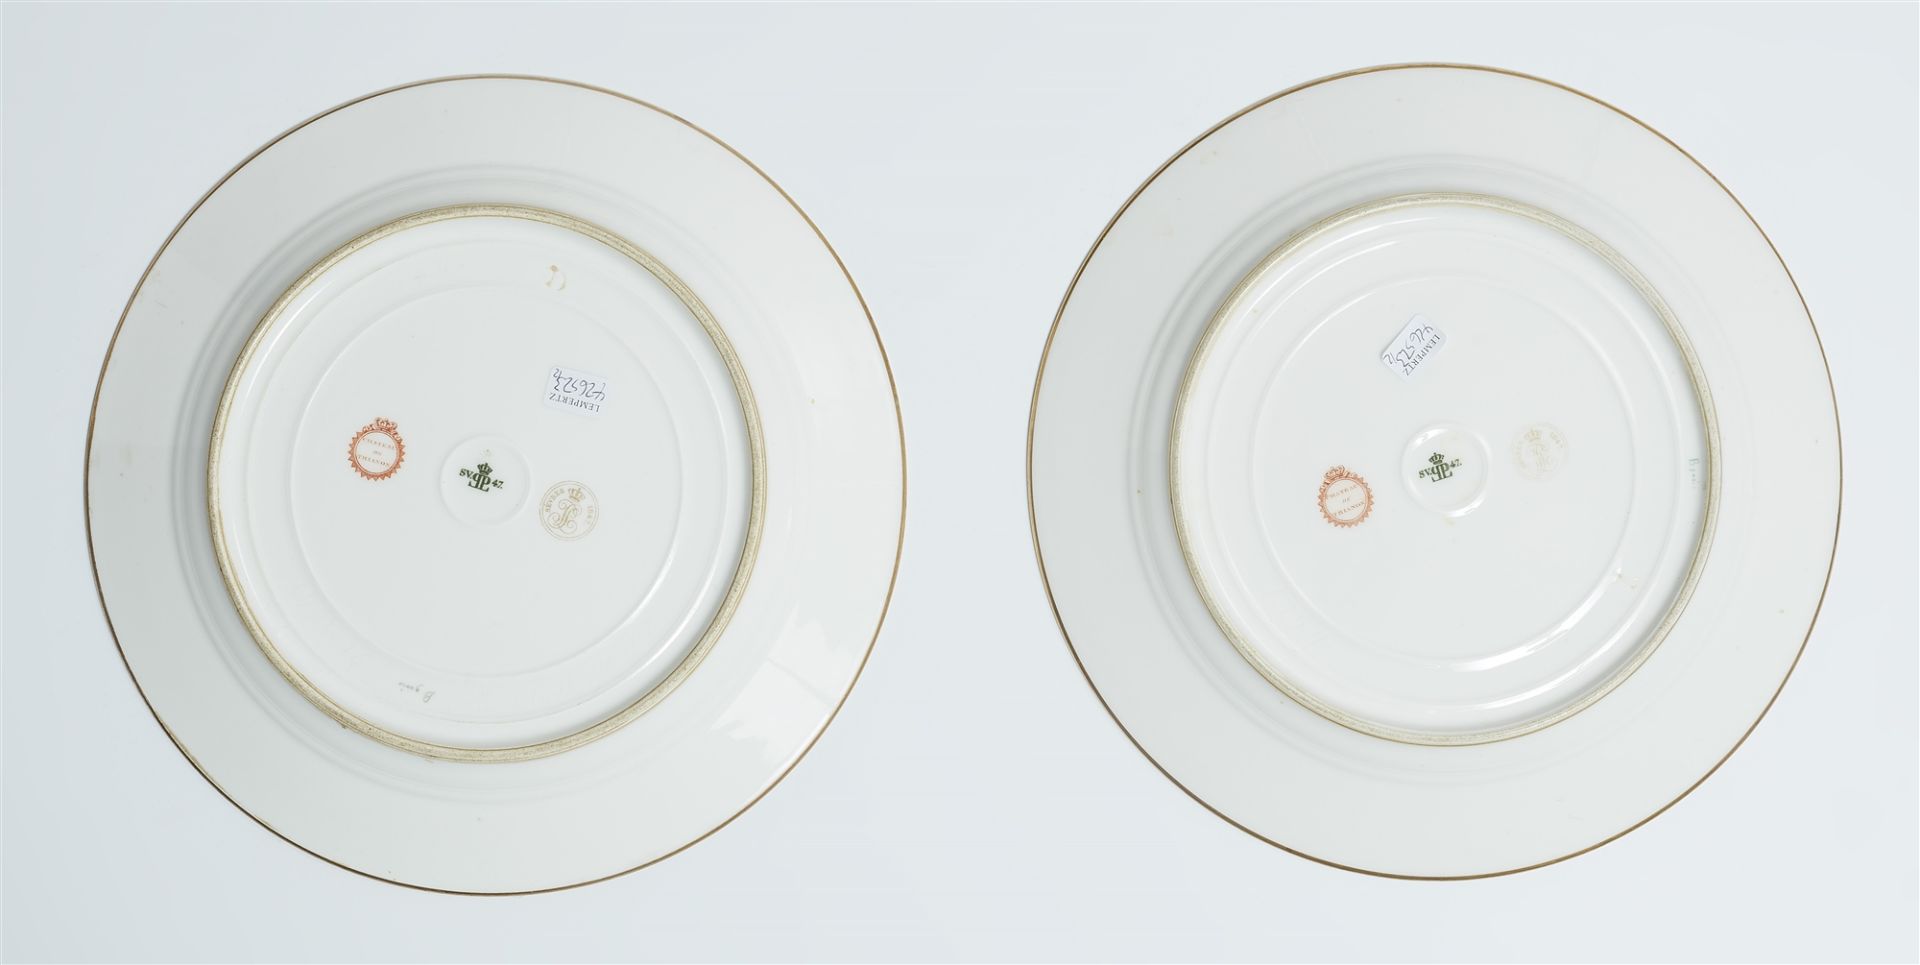 A pair of Sèvres porcelain plates from the dessert service for the Château de Trianon - Image 2 of 2